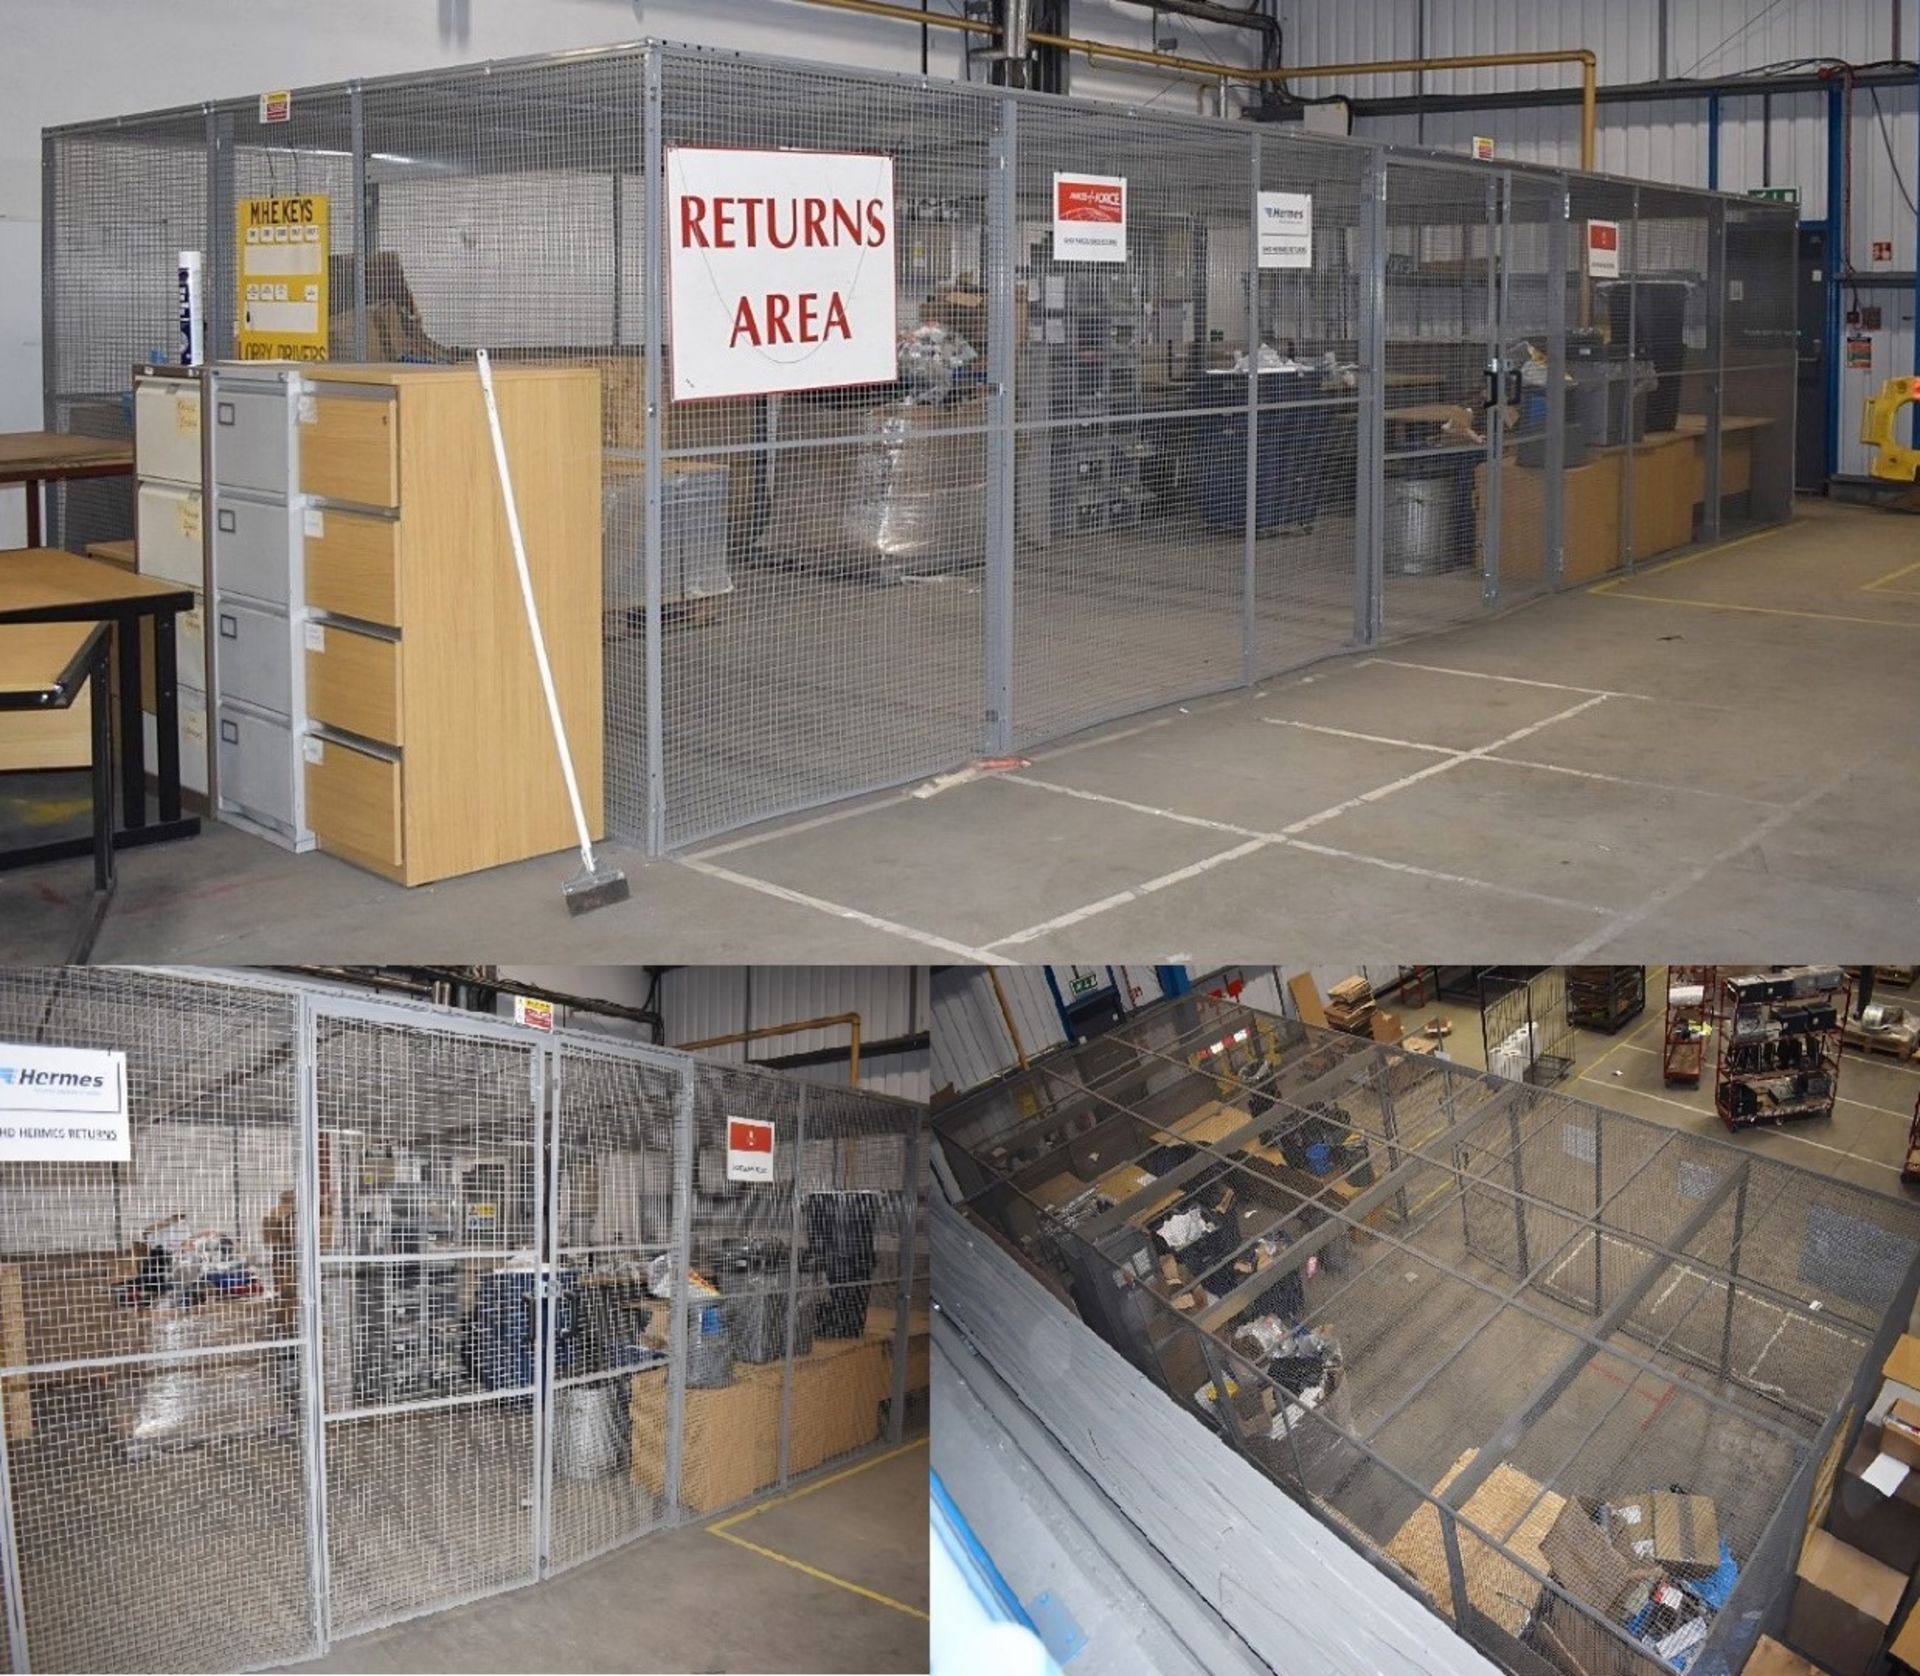 1 x Security Cage Enclosure For Warehouses - Ideal For Storing High Value Stock or Hazardous Goods -